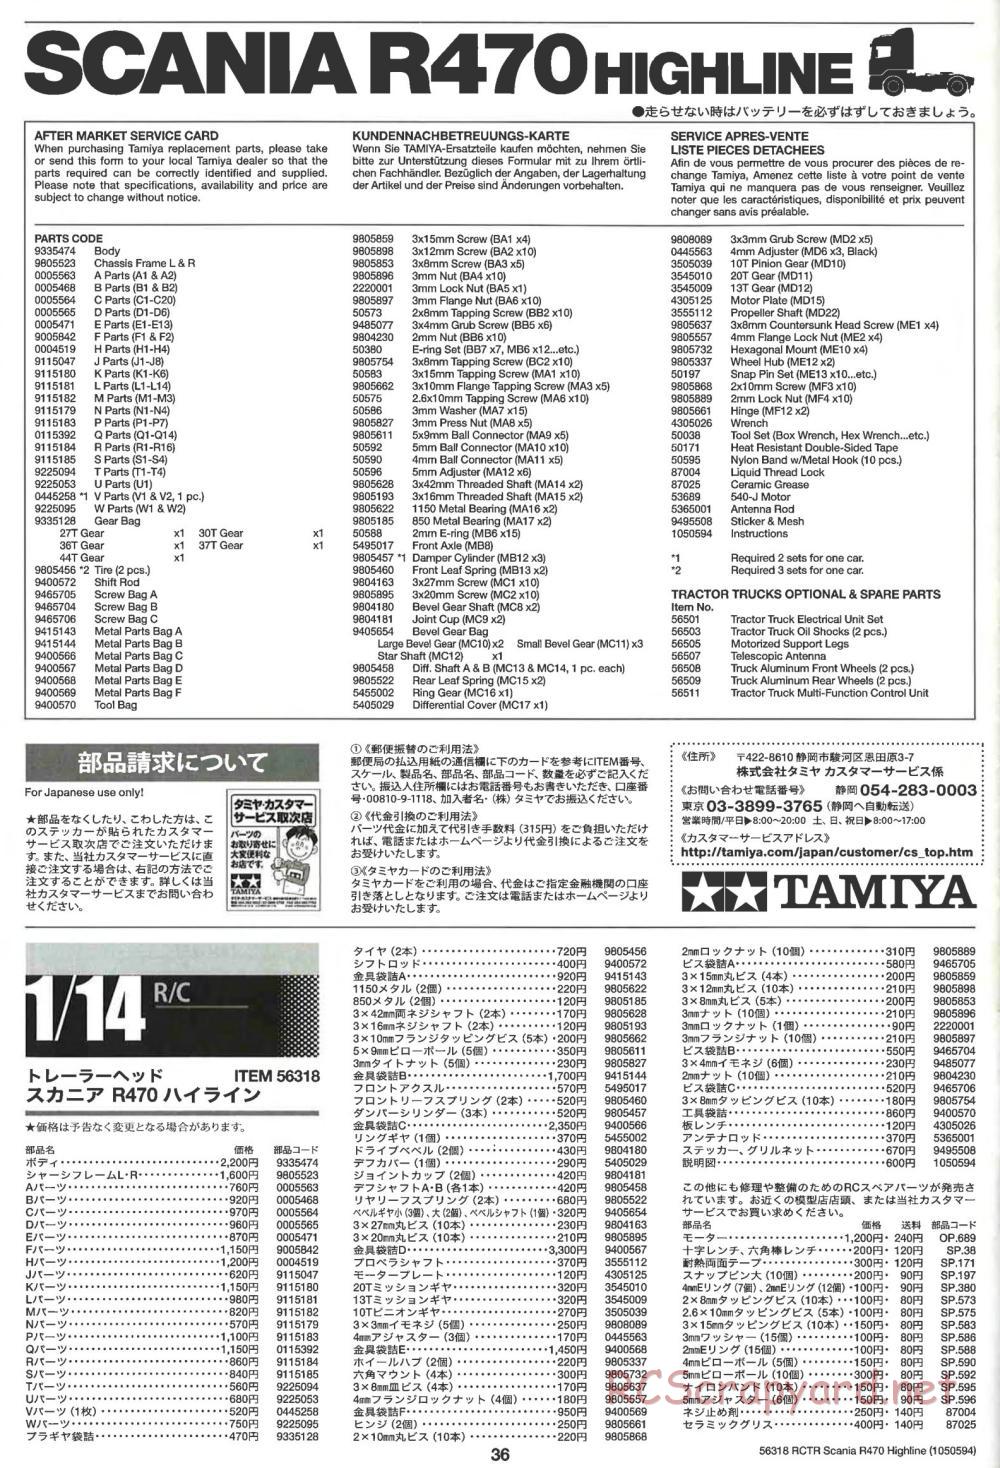 Tamiya - Scania R470 Highline Tractor Truck Chassis - Manual - Page 36